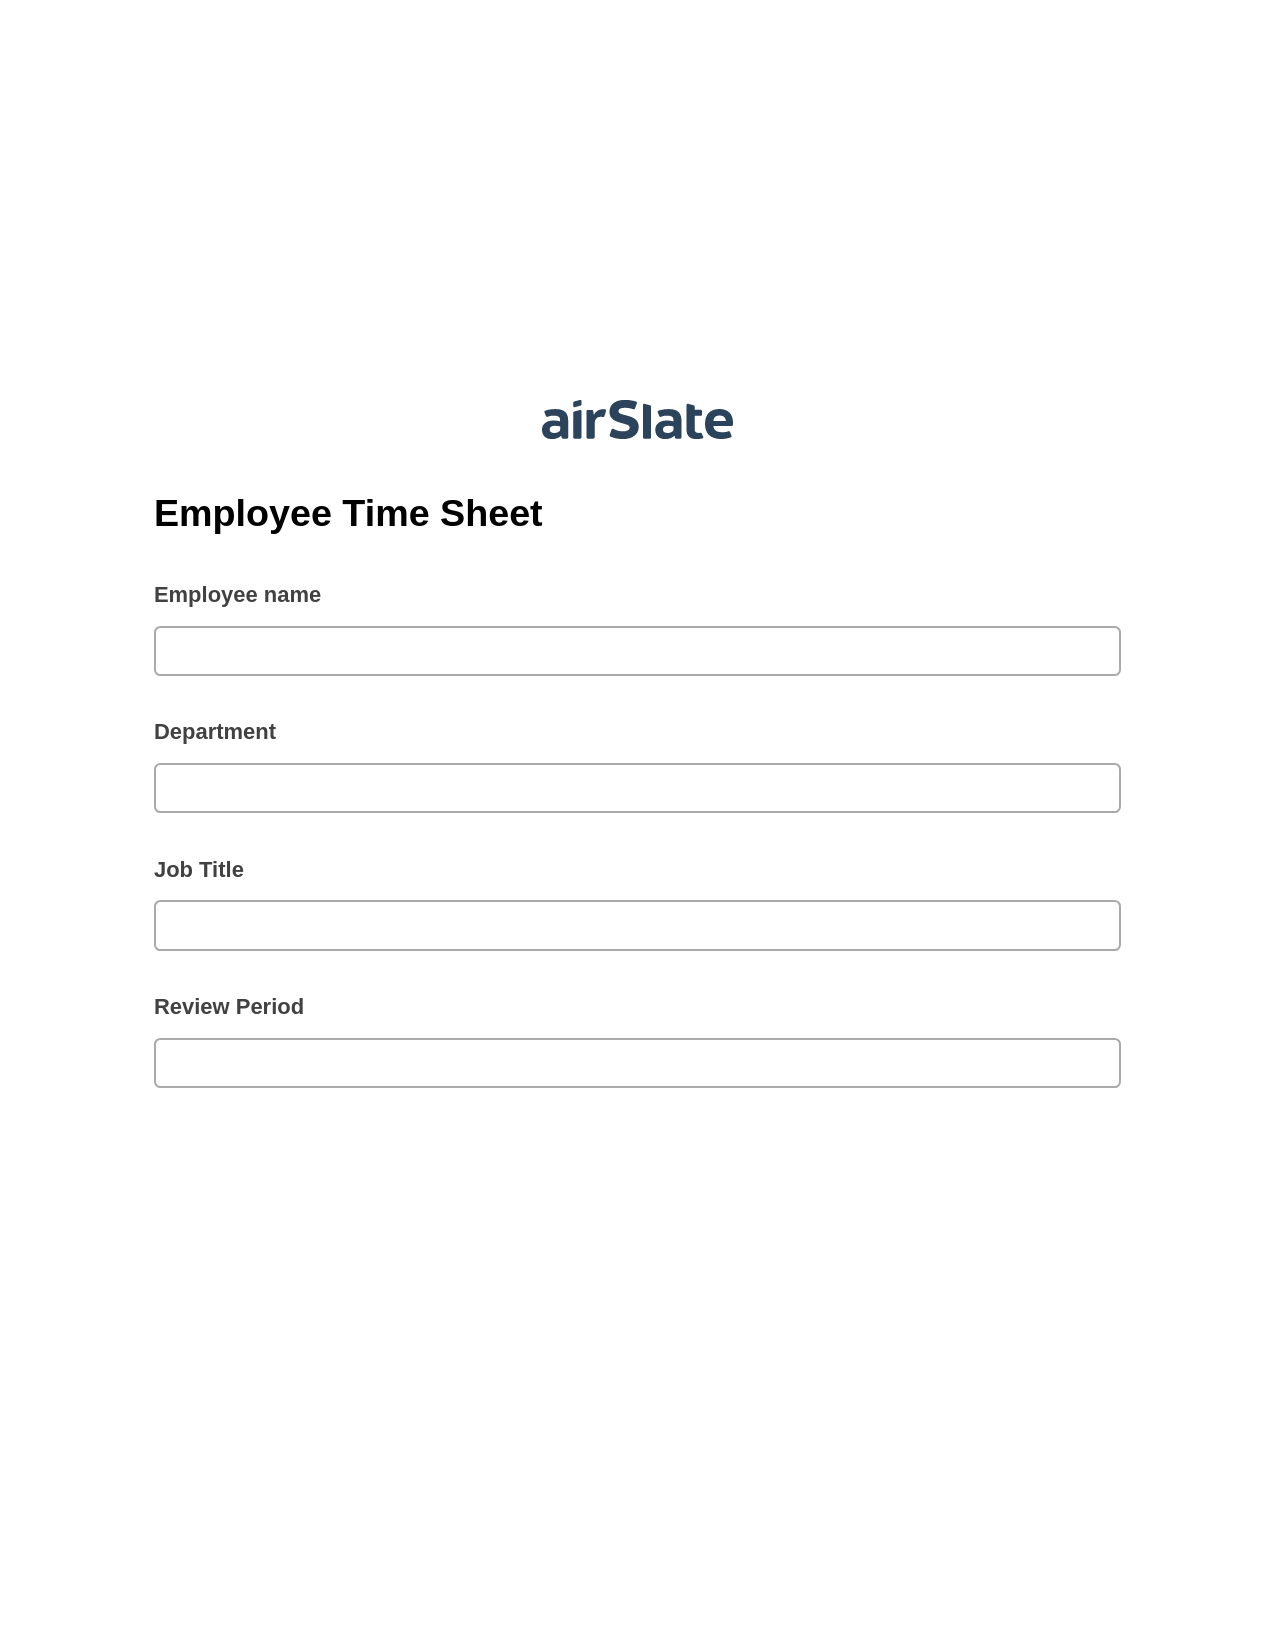 Multirole Employee Time Sheet Pre-fill from CSV File Bot, Create slate addon, Export to Excel 365 Bot